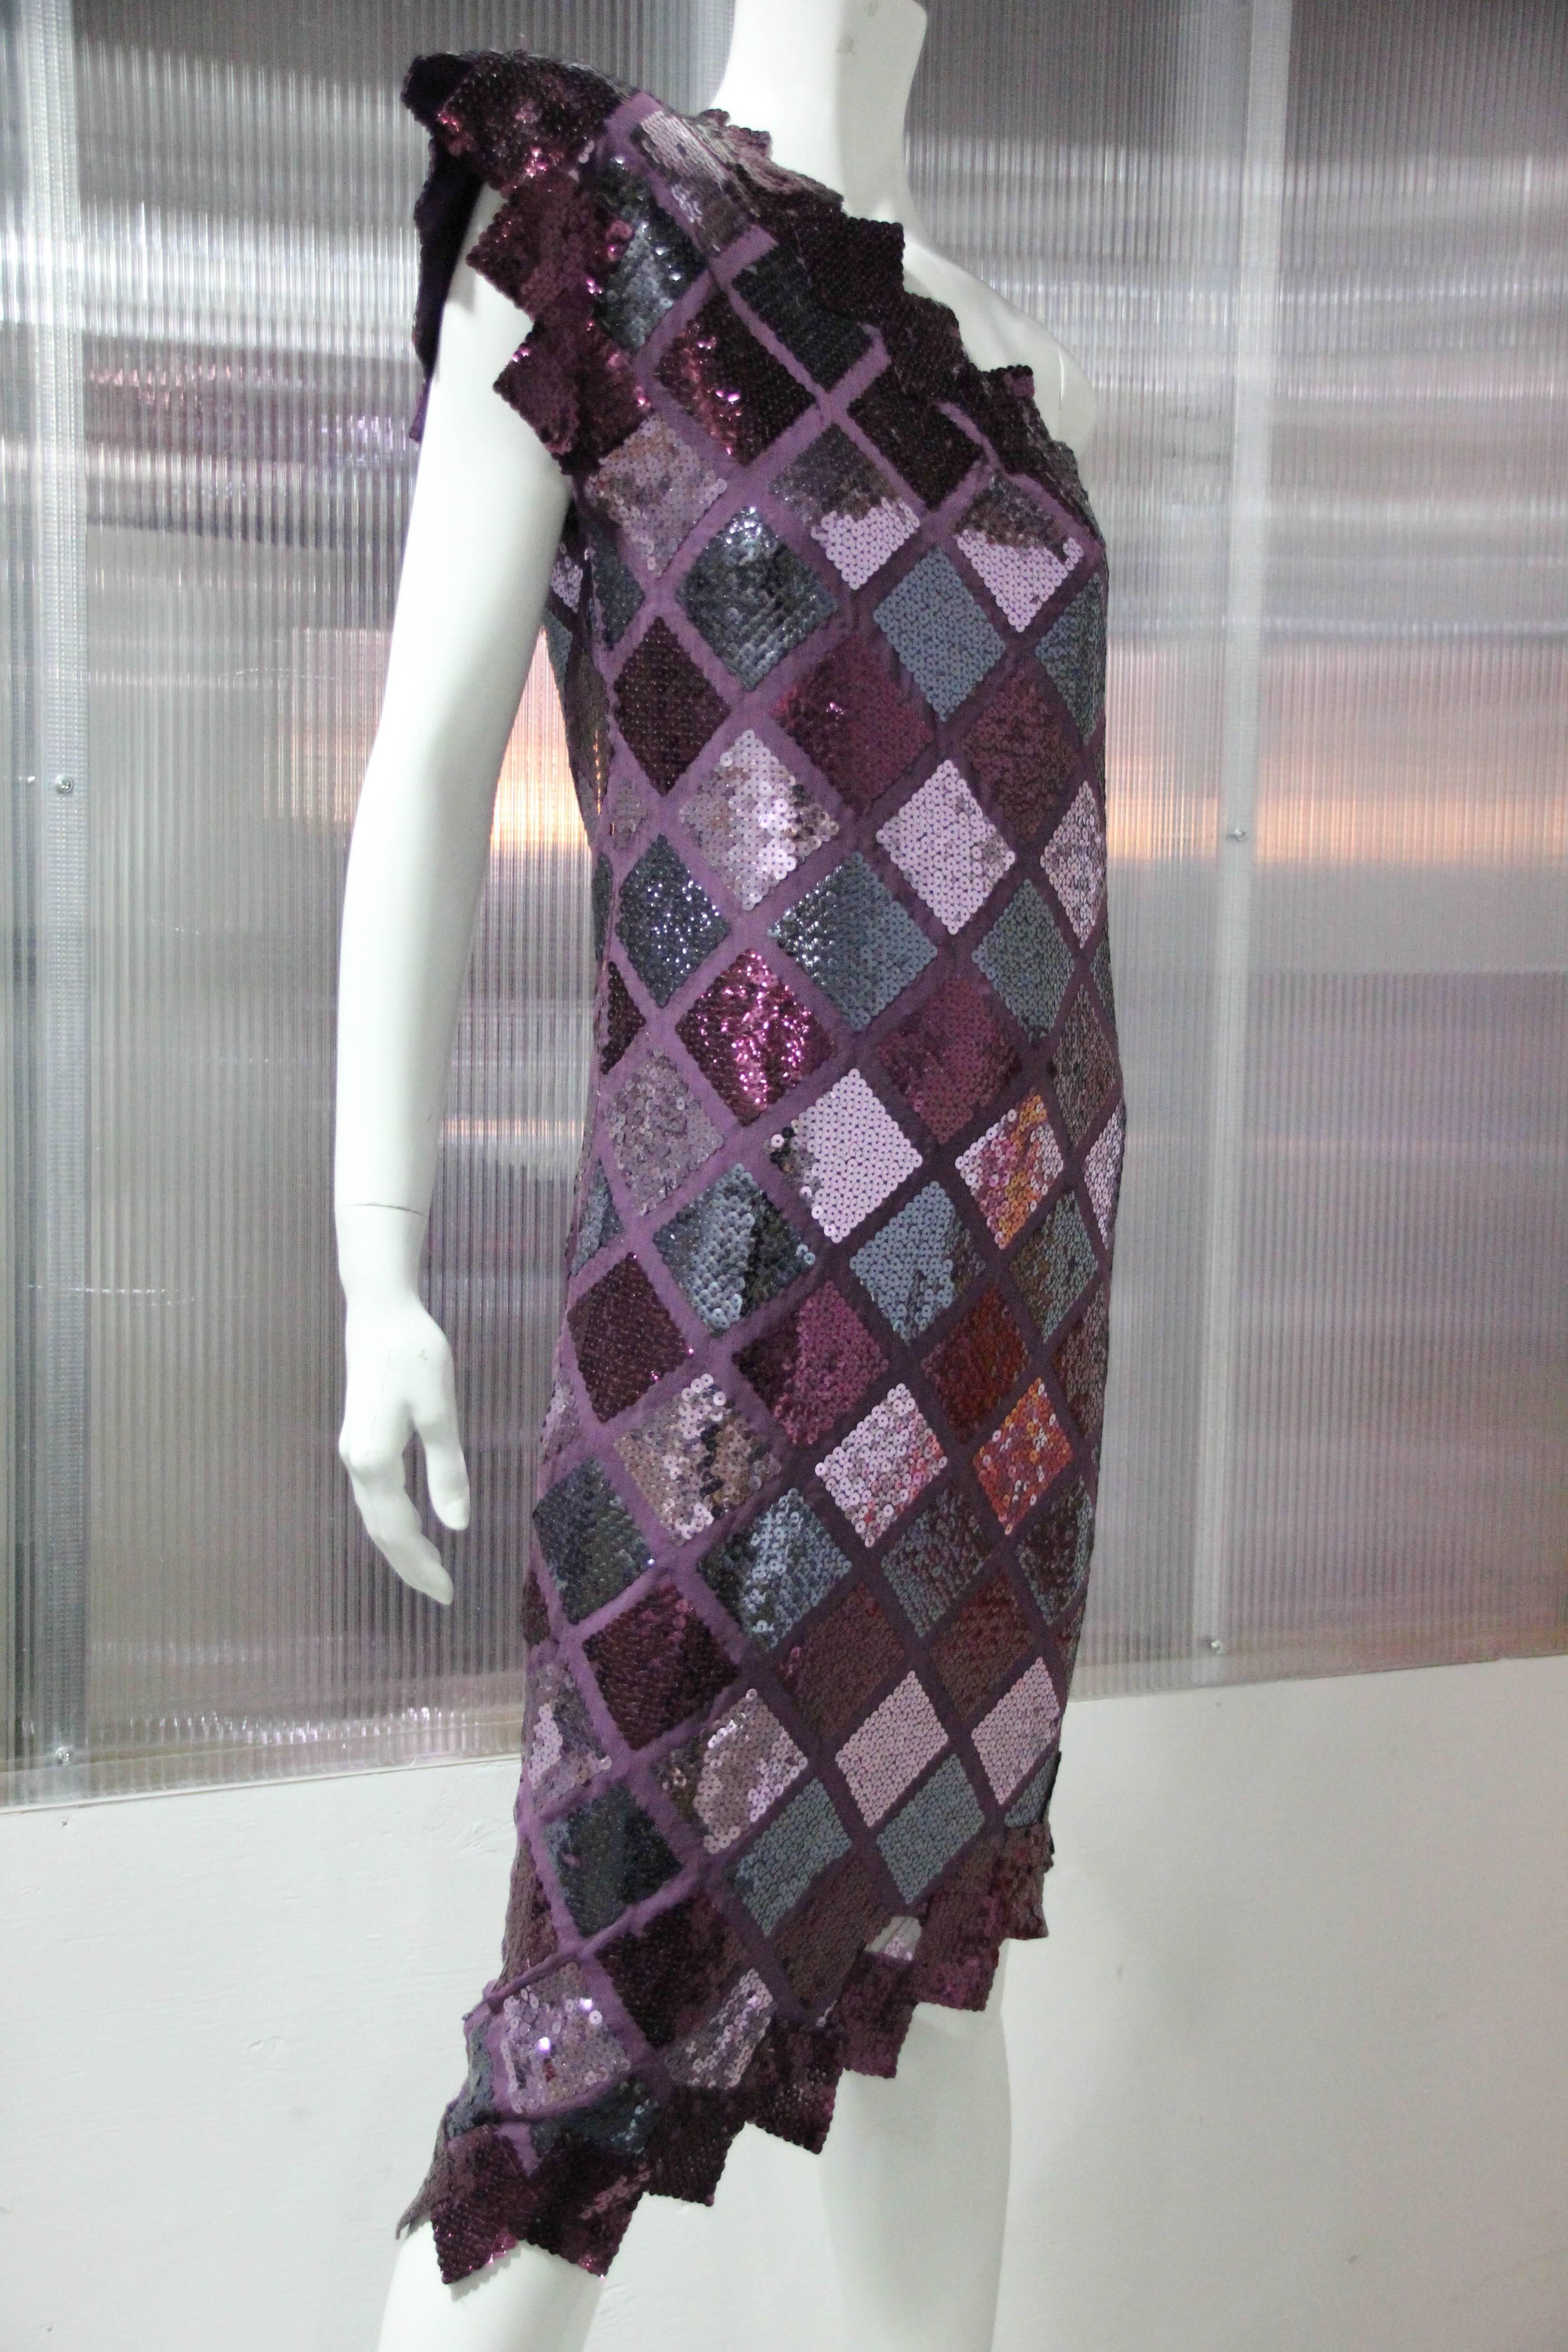 1980s custom-made, one-shoulder, sequin and satin dress, in burgundy and gunmetal harlequin pattern.  Saw tooth hem and decolletage with a structured stand-up padded shoulder and silk lining.
Striking !
